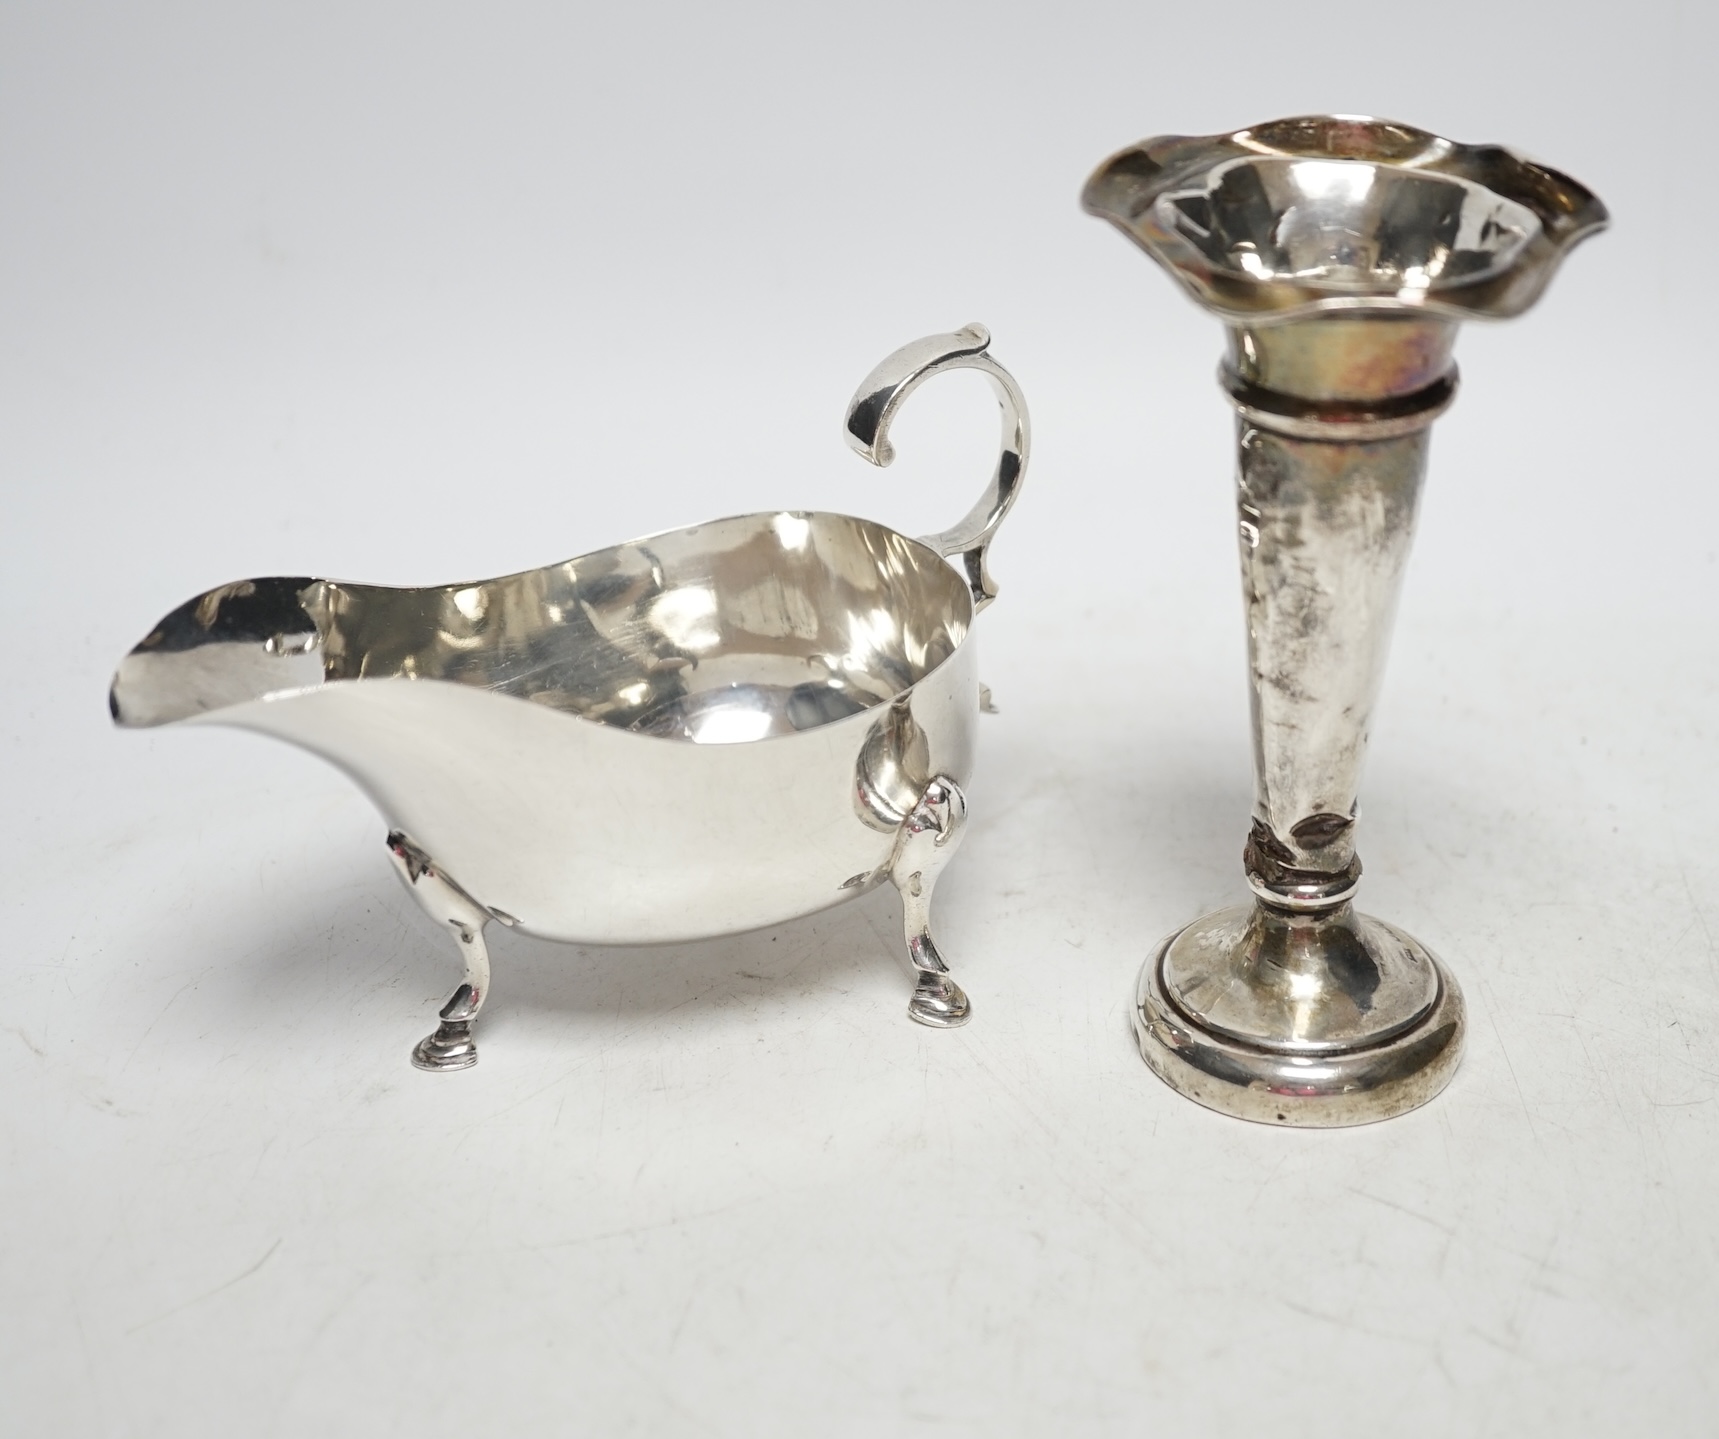 A George V silver sauceboat, Sheffield 1925, 14.5cm, 4.2oz and a similar silver mounted posy vase. Fair and poor condition.